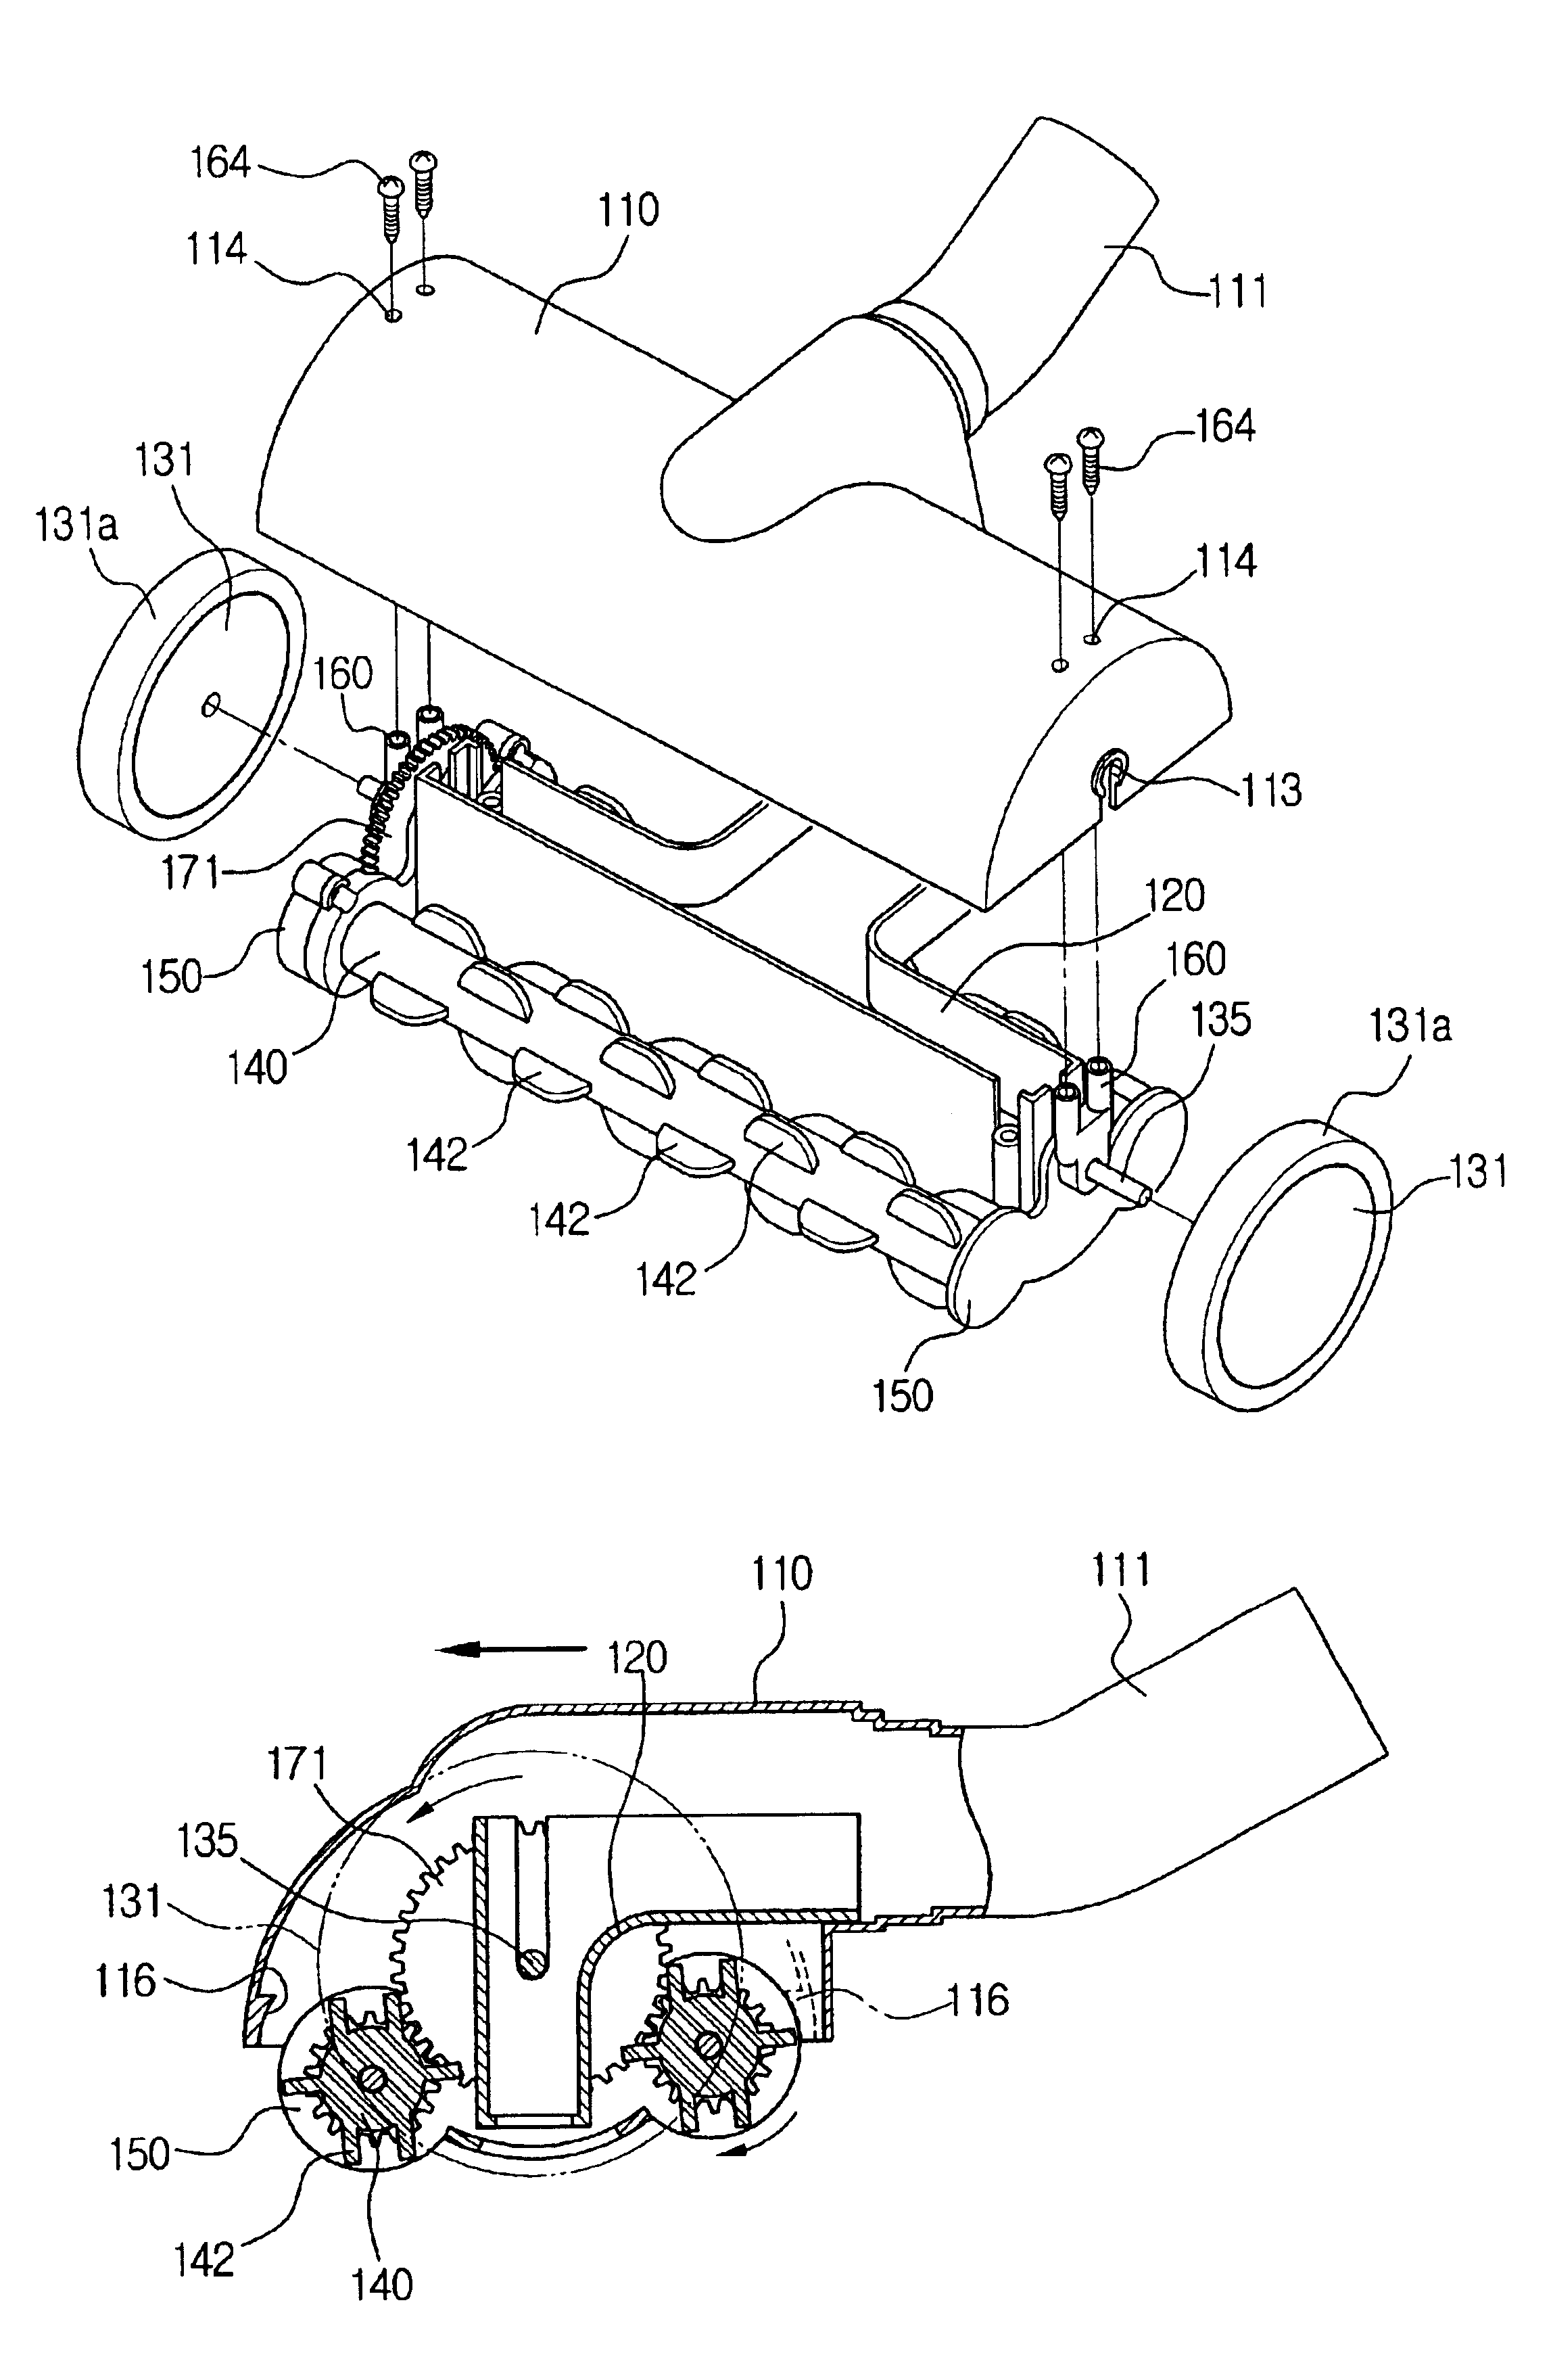 Suction brush assembly having rotation roller for sweeping dust